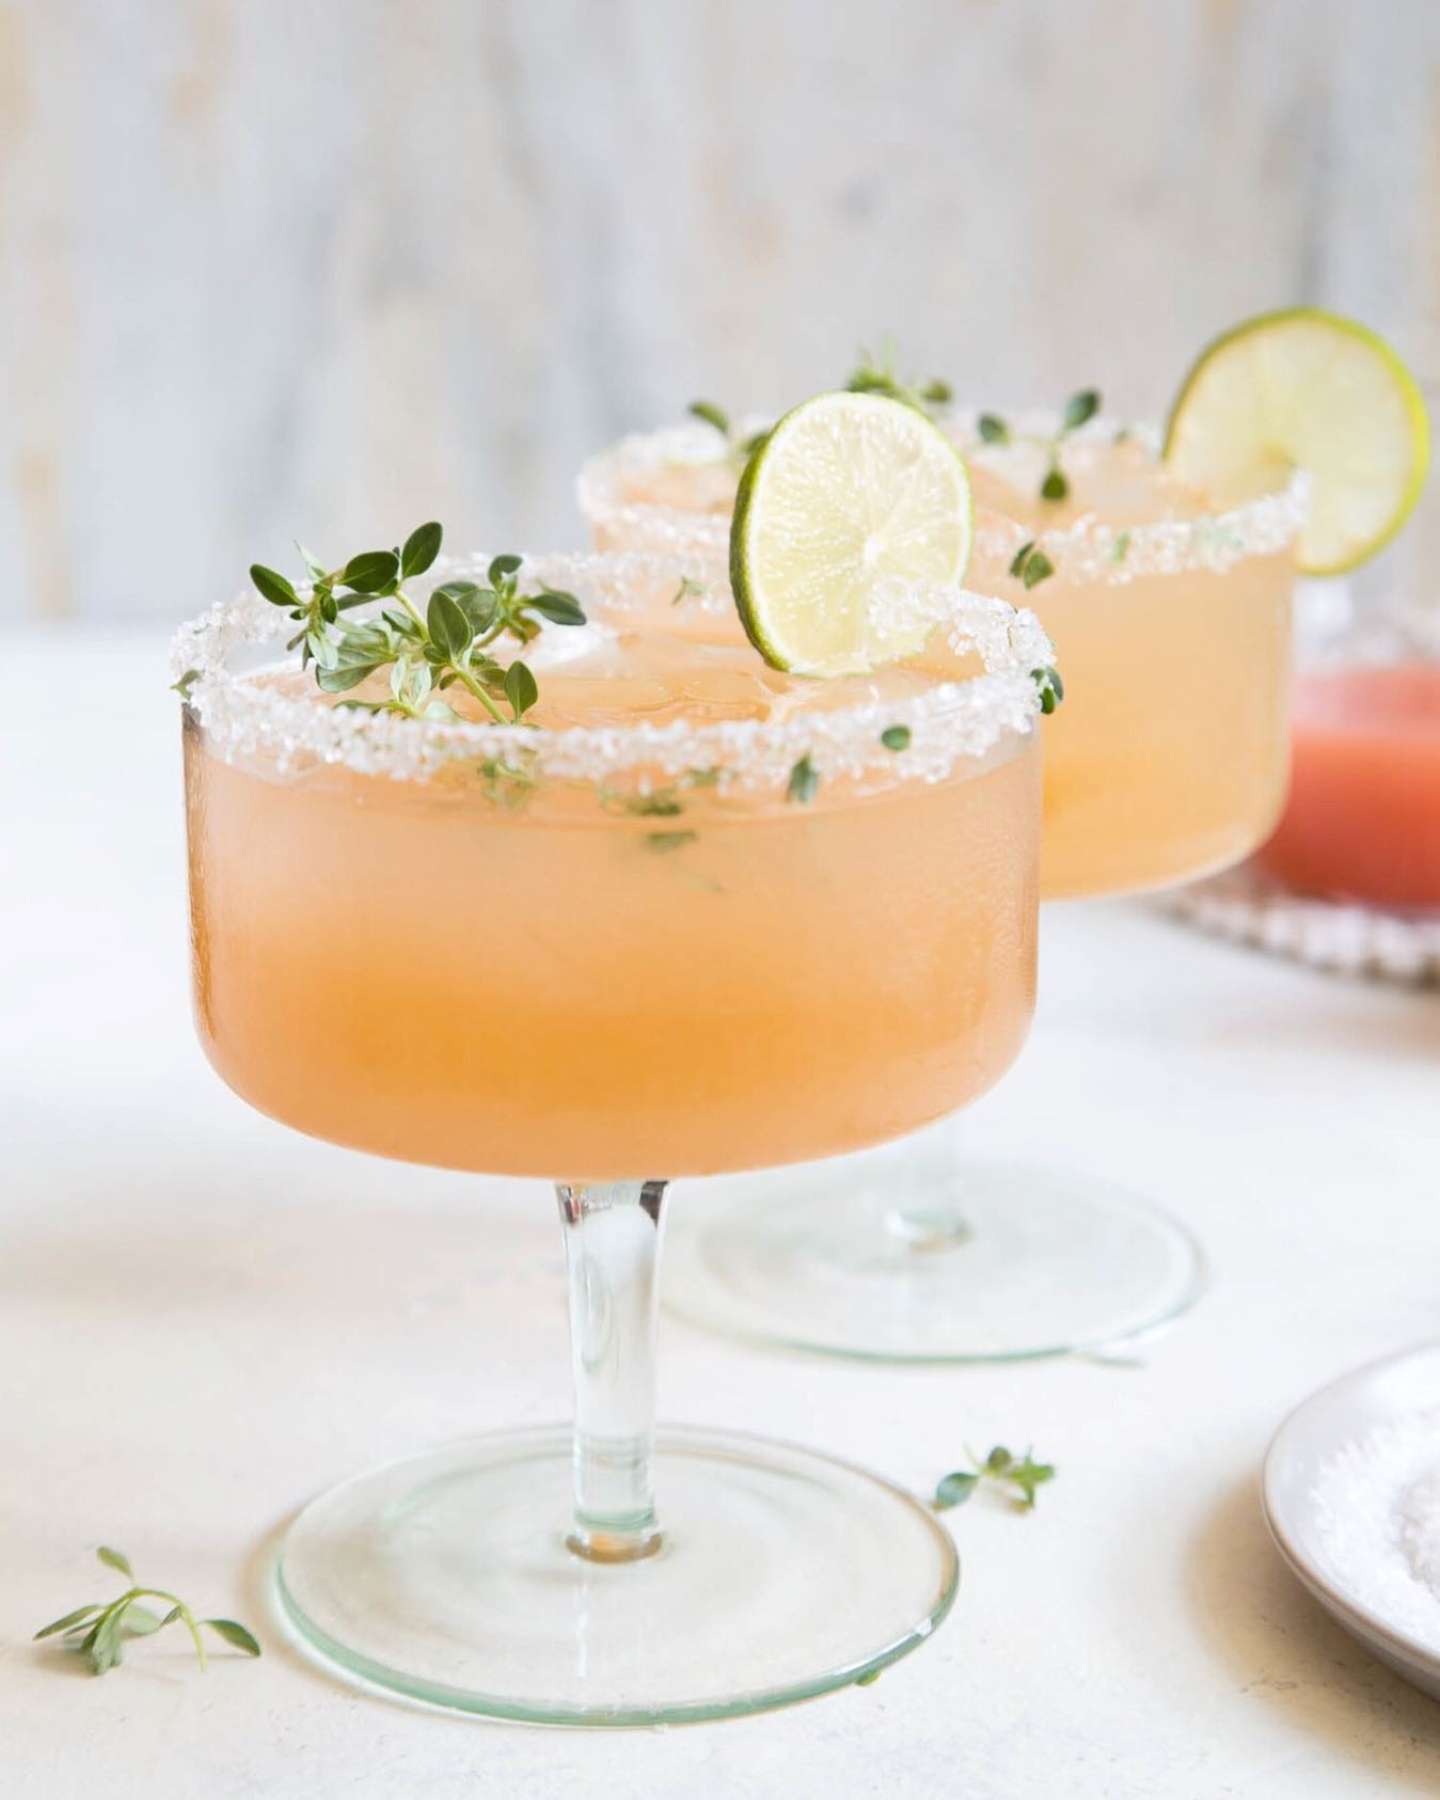 4 Cocktails to Get You in the Holiday Spirit